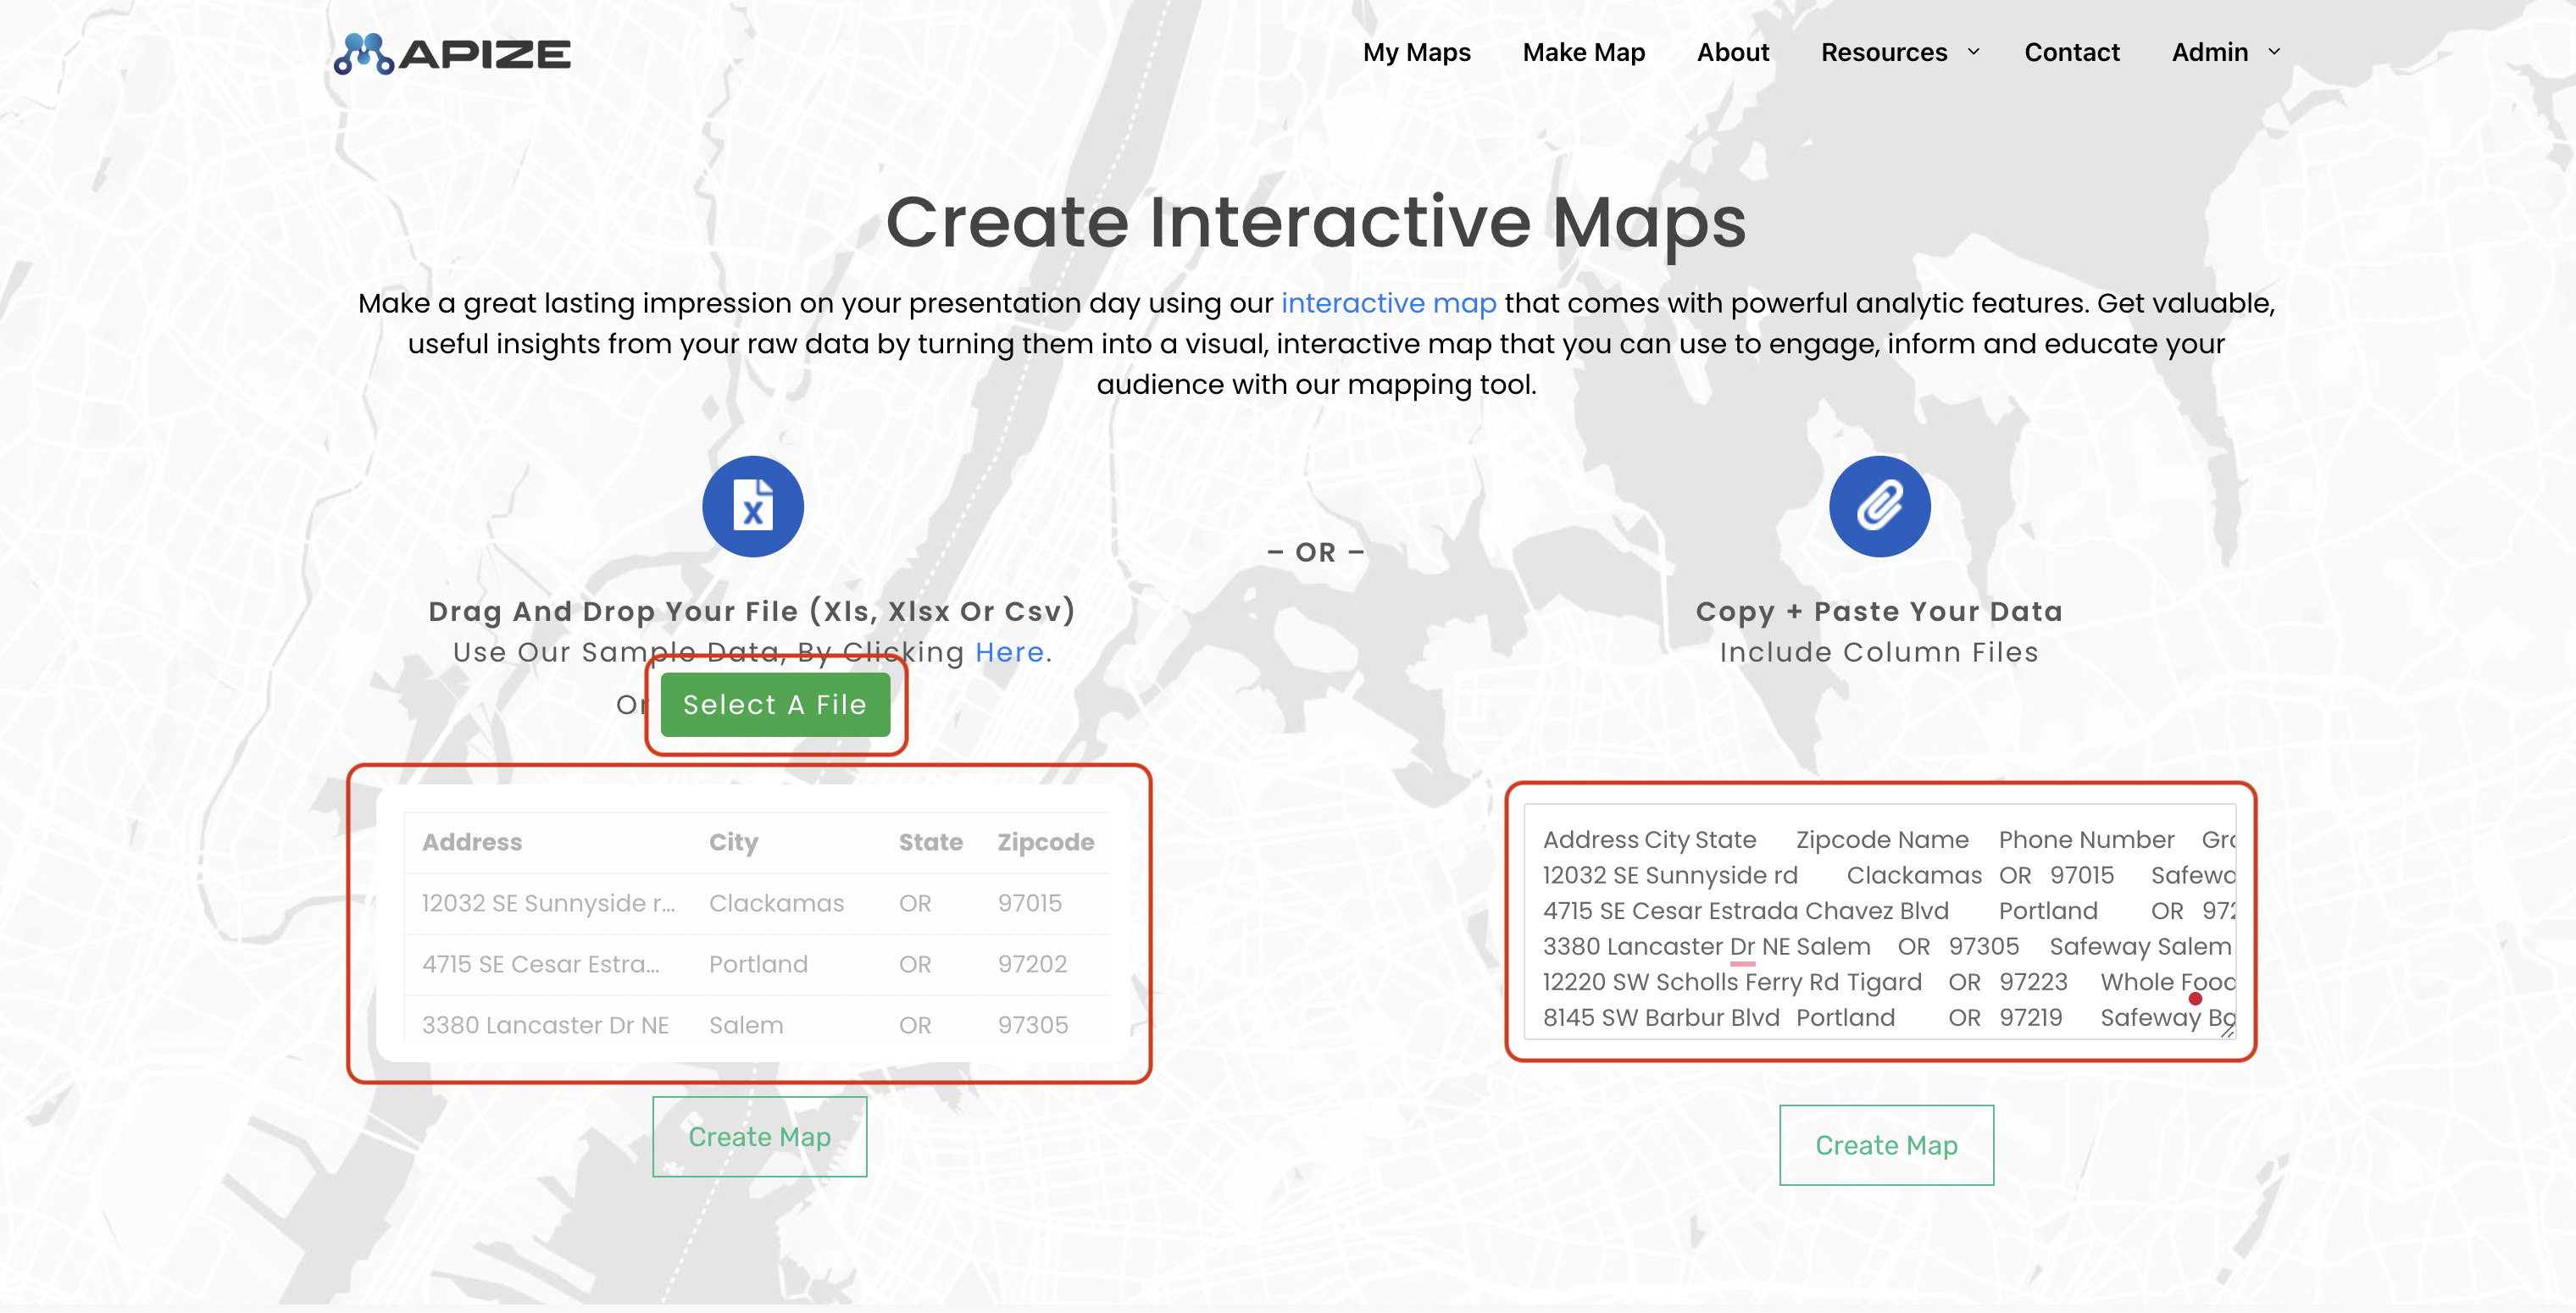 Mapize shows three ways to create maps using the site's home page mapping software.